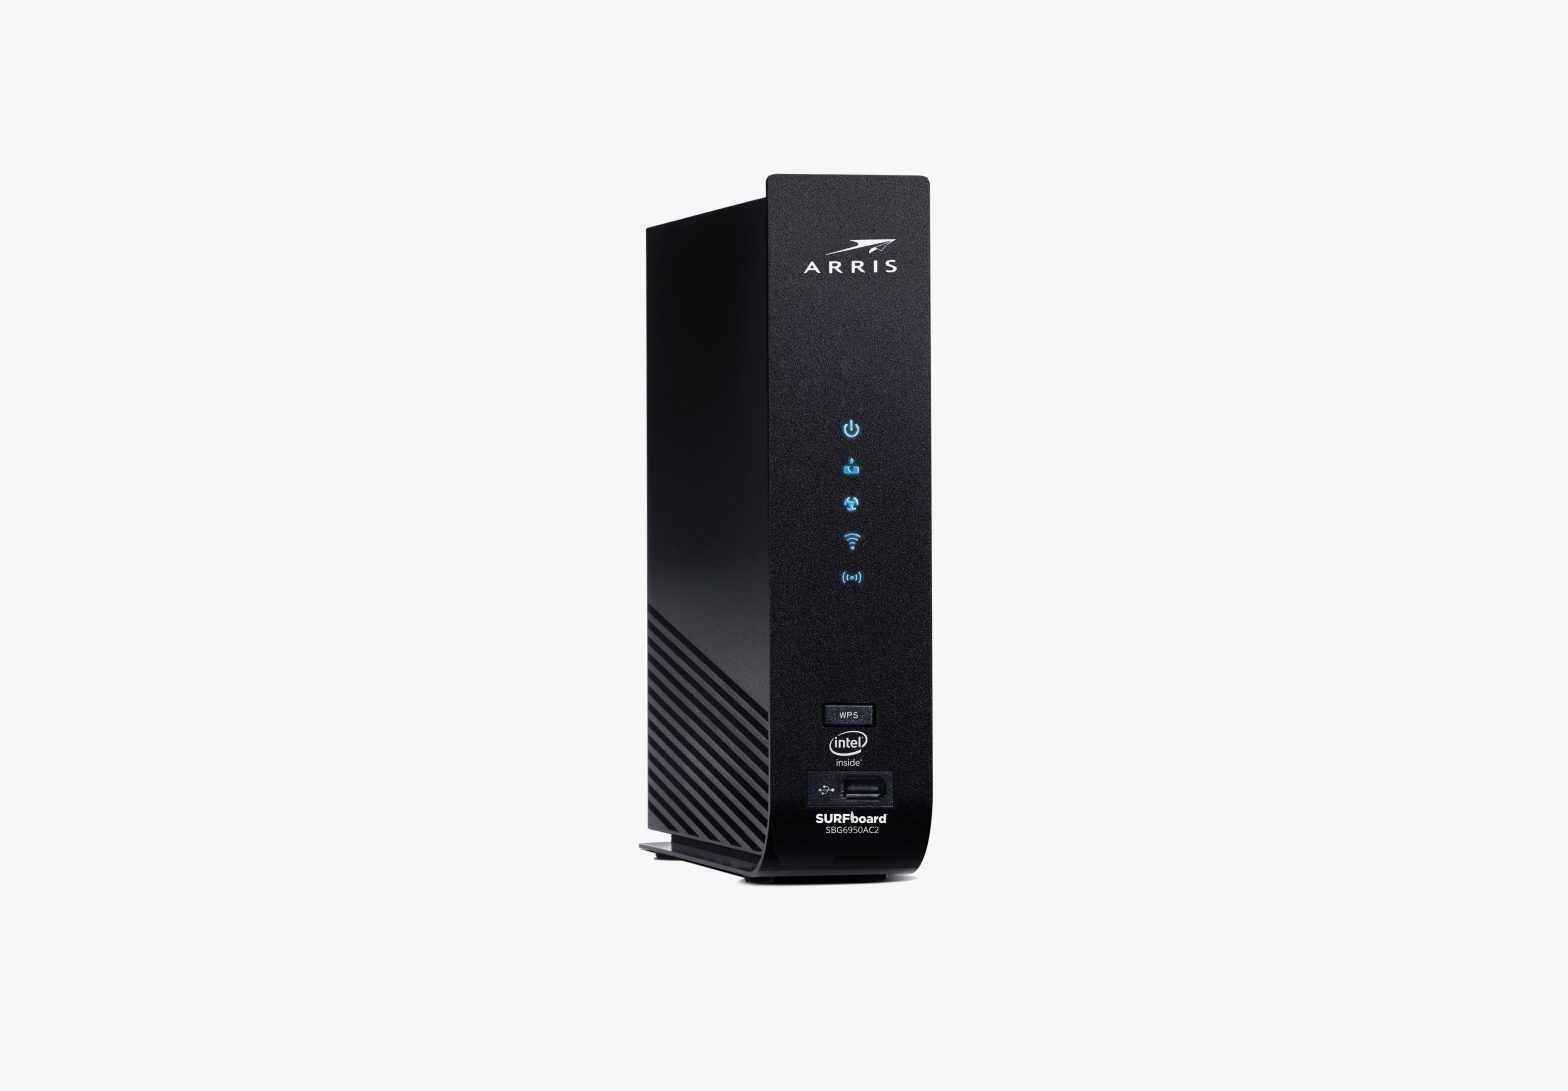 ARRIS SBG6950AC2 Cable Modem and Wi-Fi Router User Guide